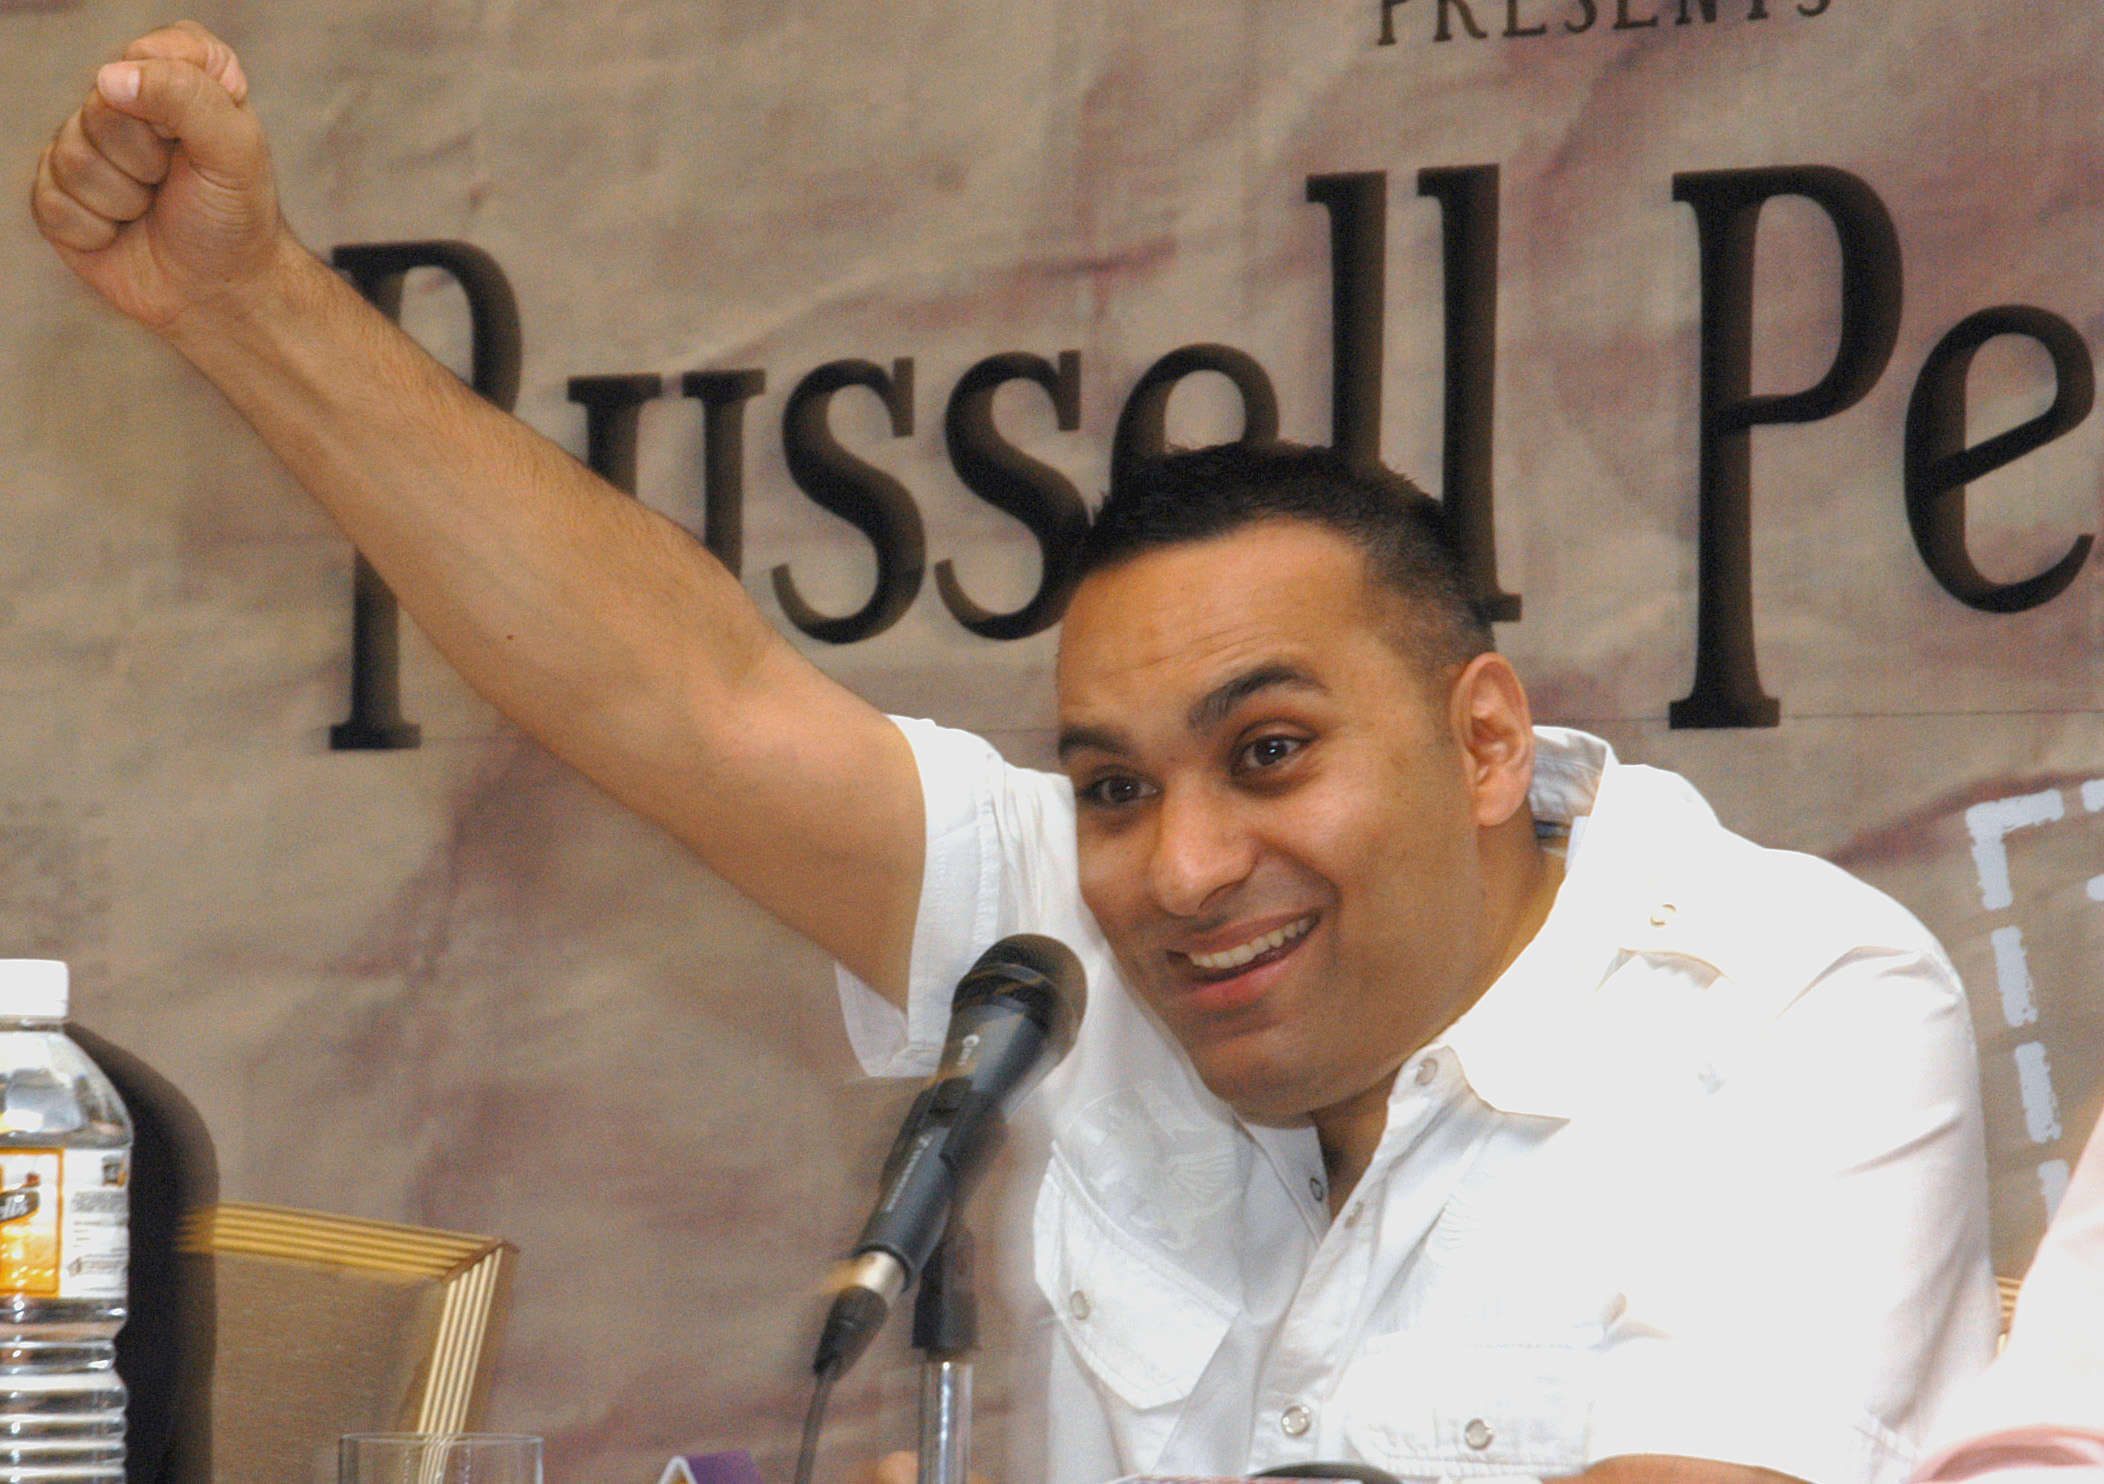 RUSSELL PETERS